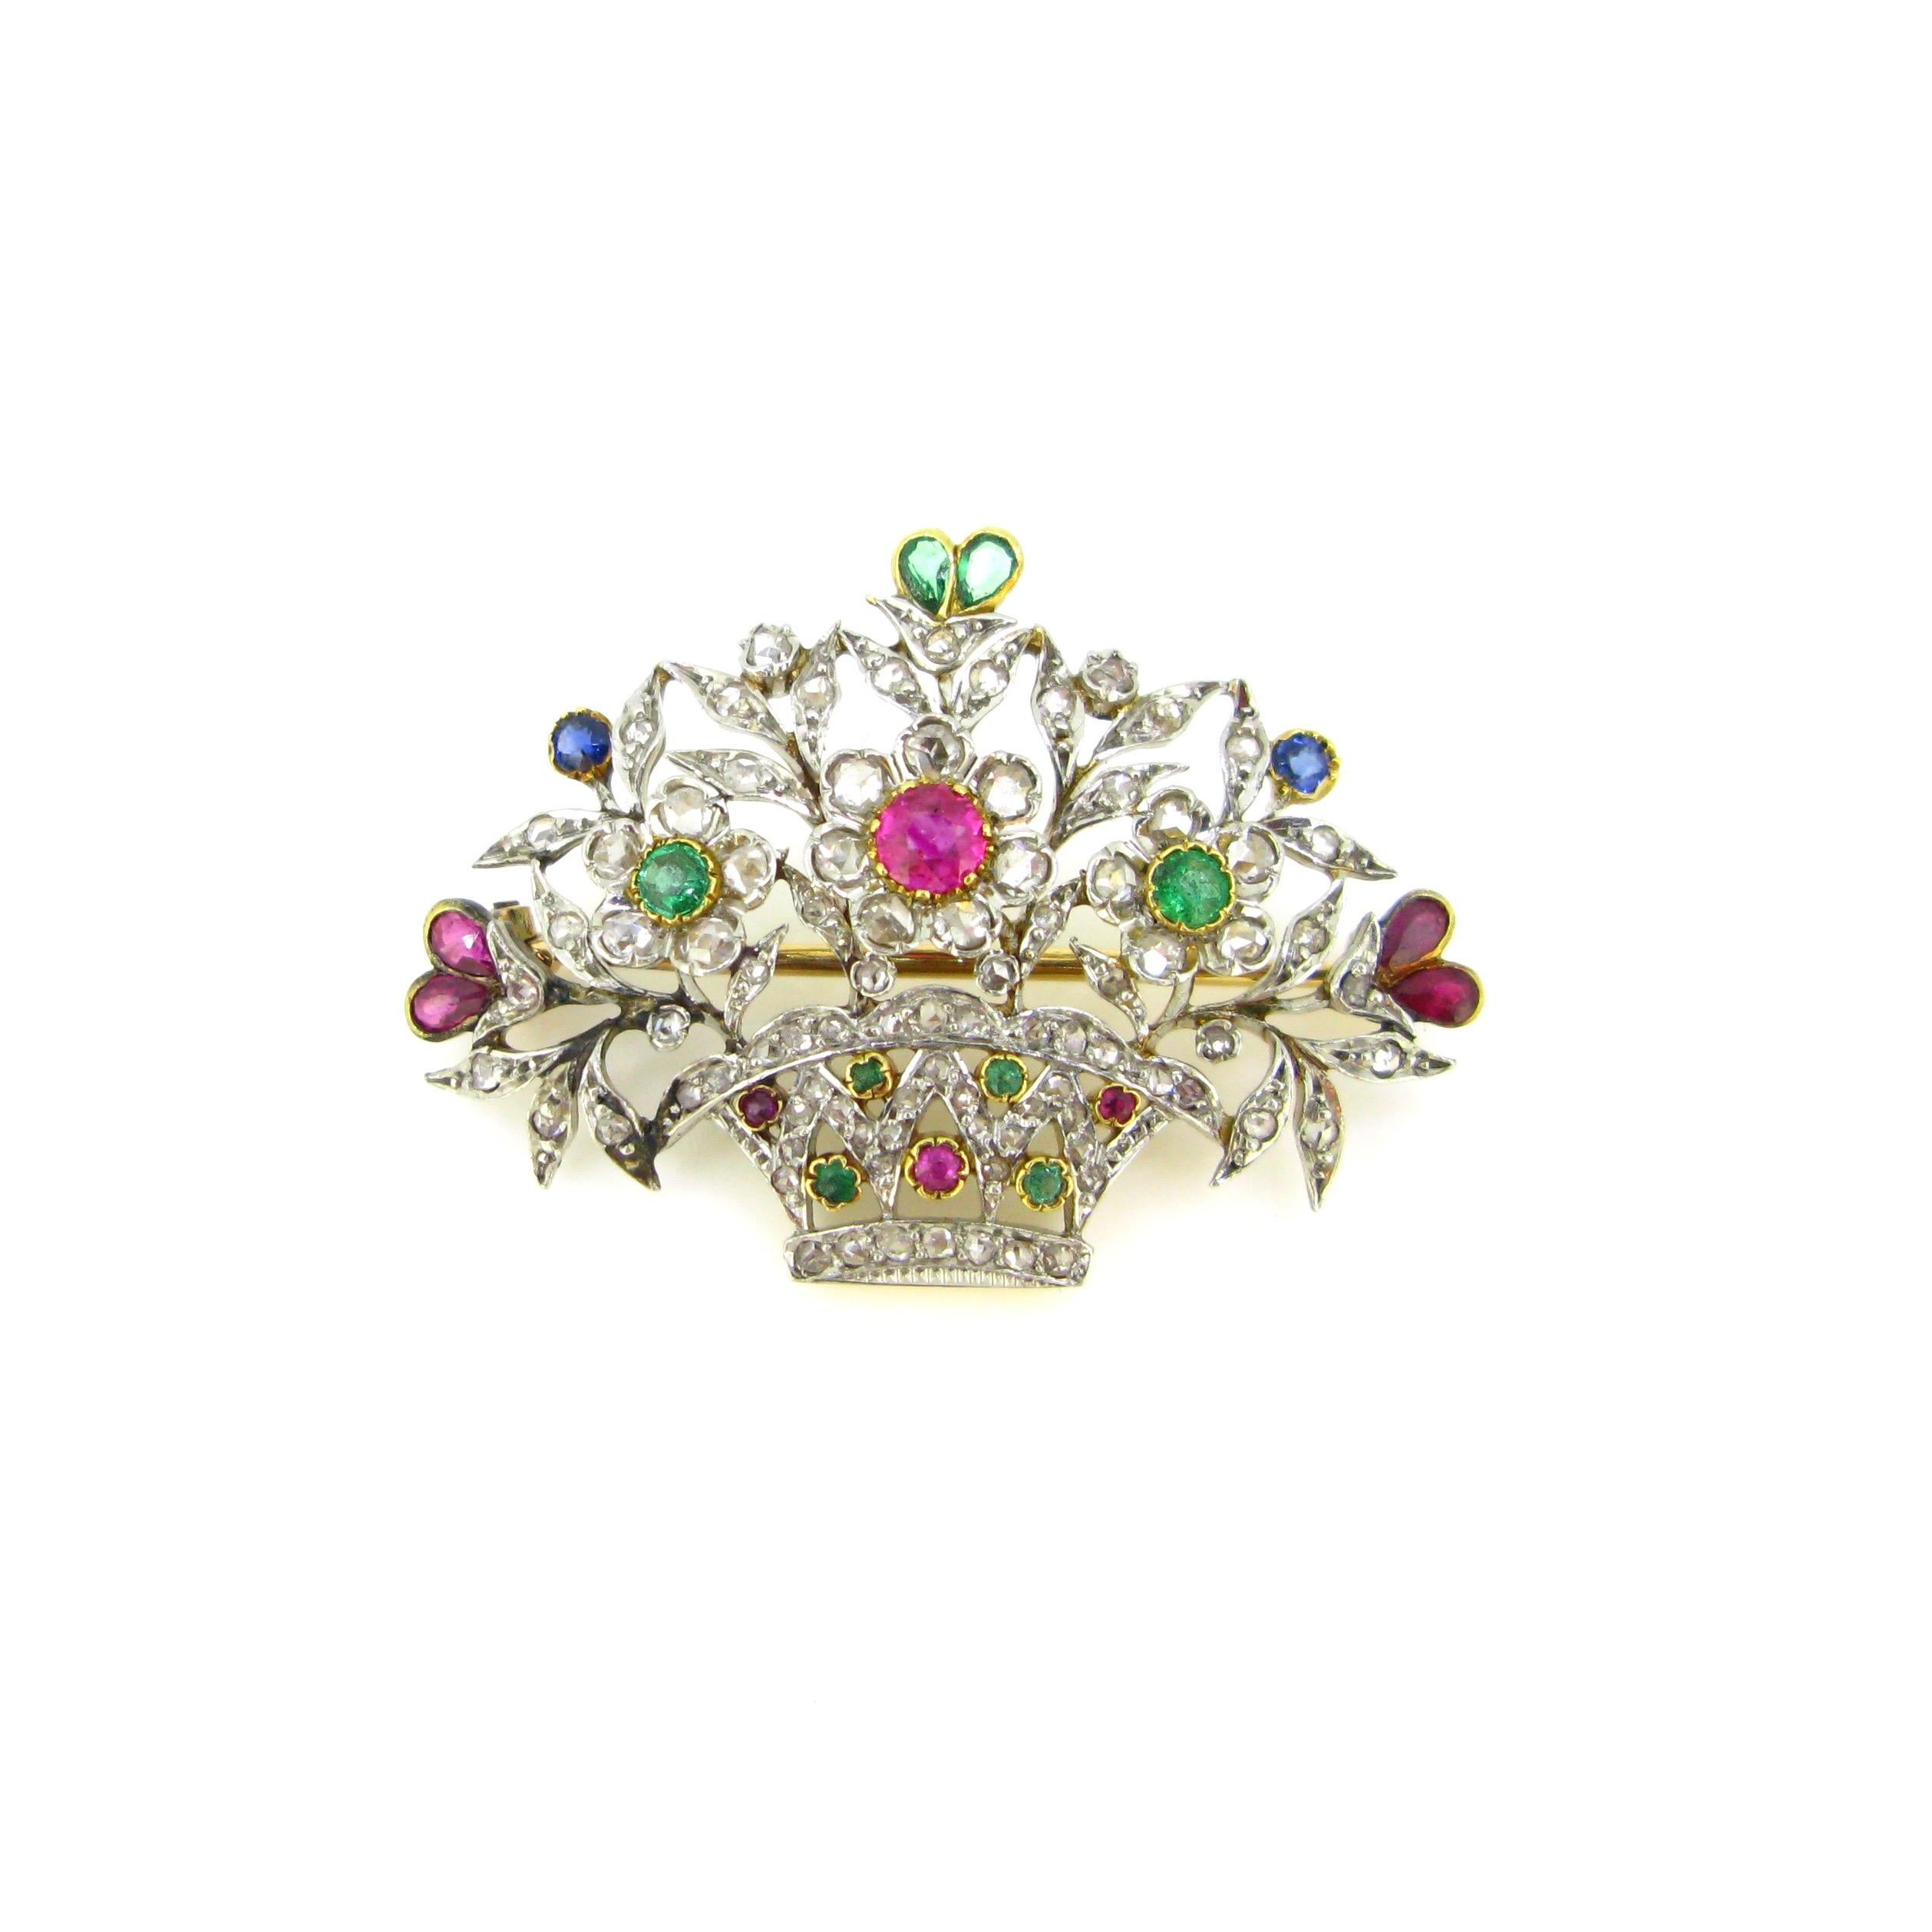 This brooch features blossom flowers on a basket. The brooch is set with natural rubies, emeralds and sapphires. The petals are adorned with rose cut diamonds. We can call this kind of brooch Giardinetto that means small garden in Italian. It is not